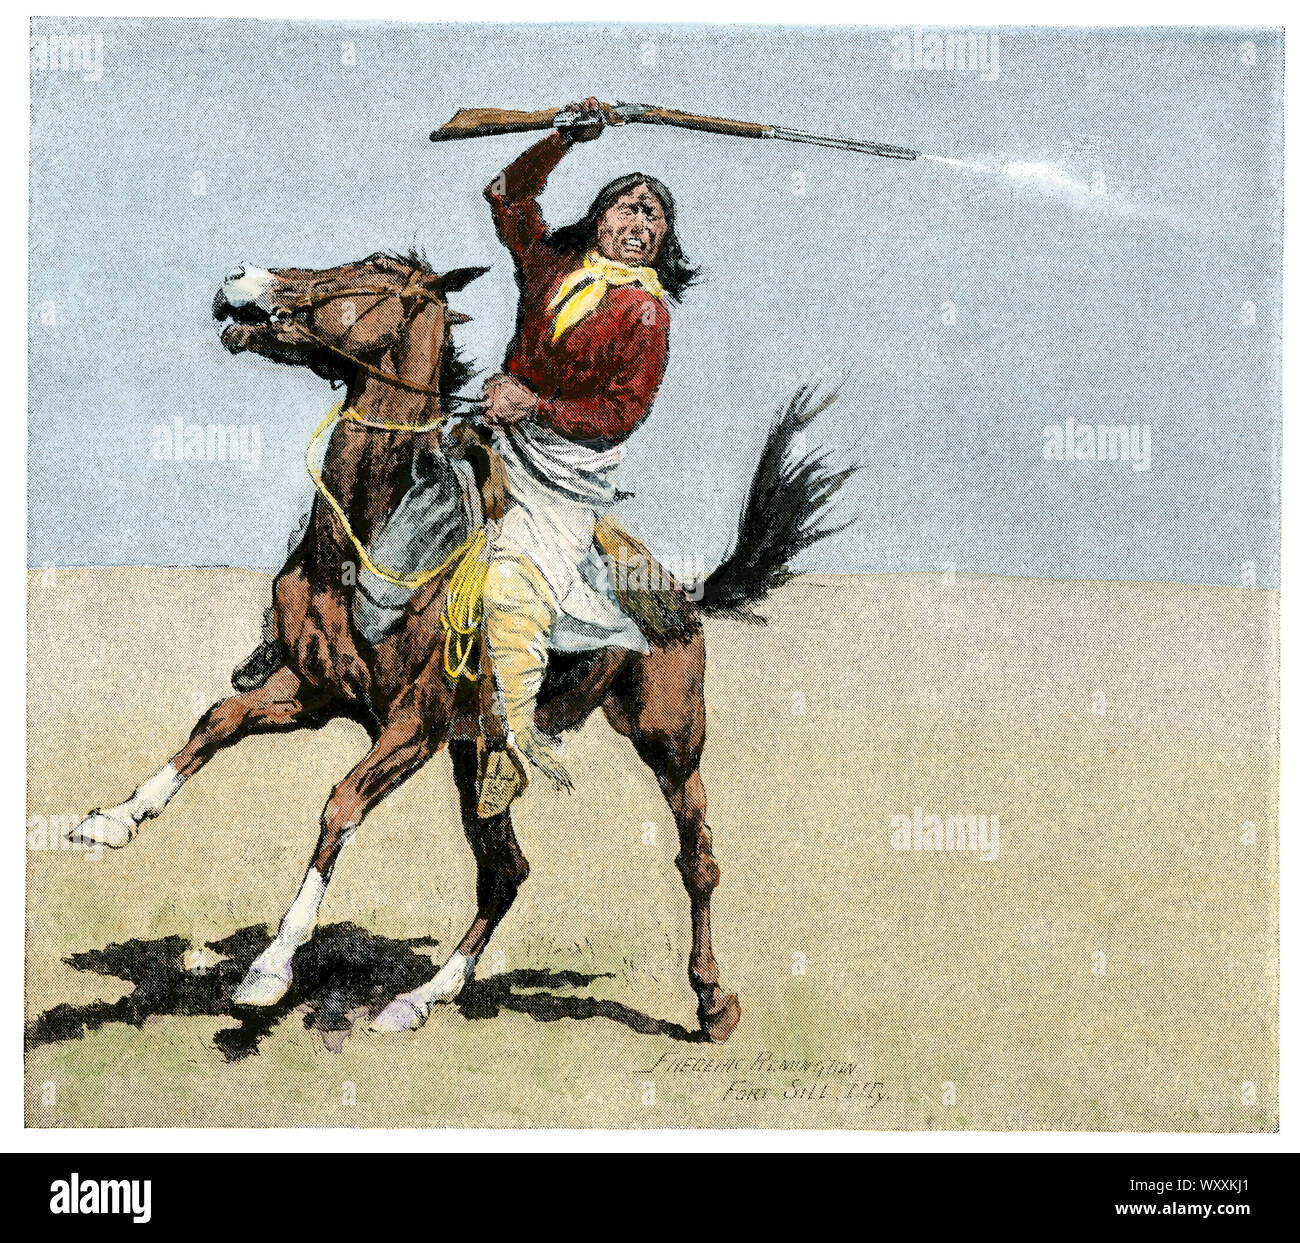 Kiowa firing a rifle to start a horse race on the plains, 1800s. Hand-colored halftone of a Frederic Remington illustration Stock Photo